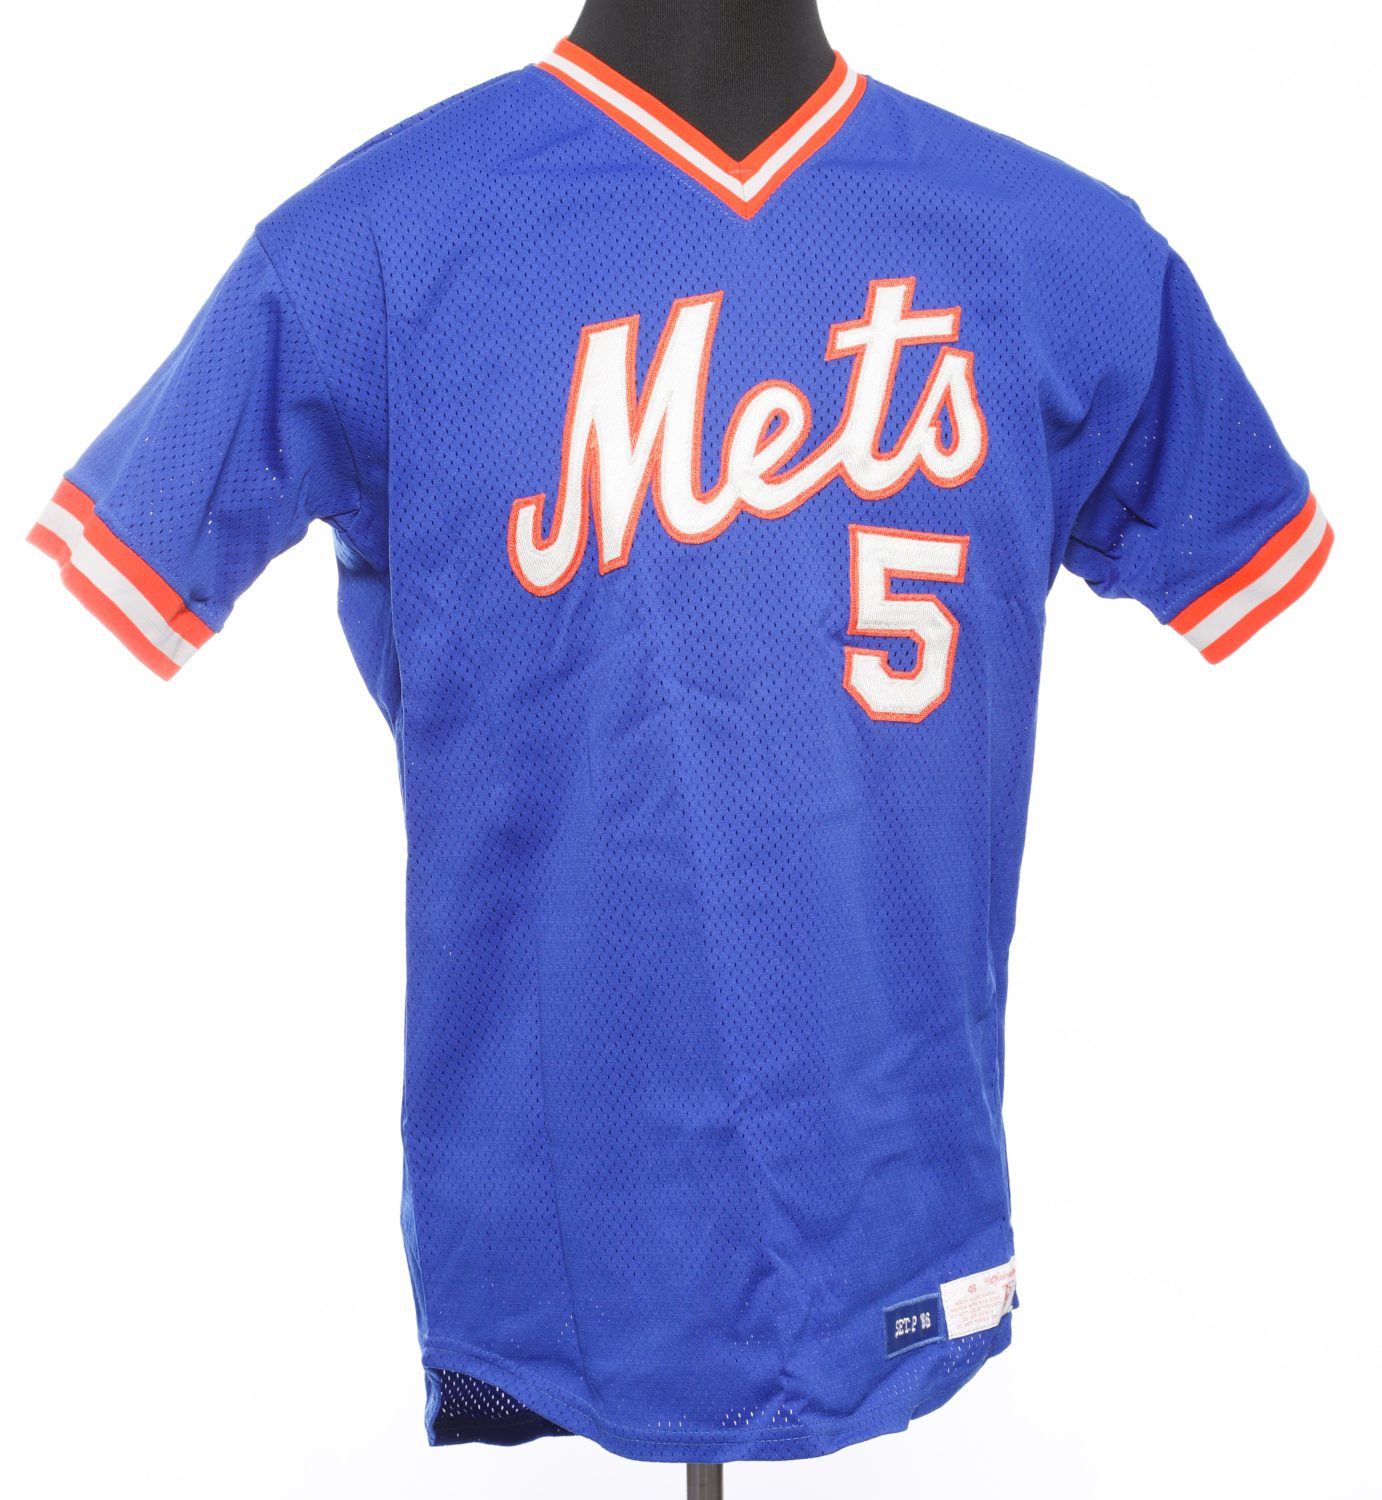 Davey Johnson Autographed Mets Jersey